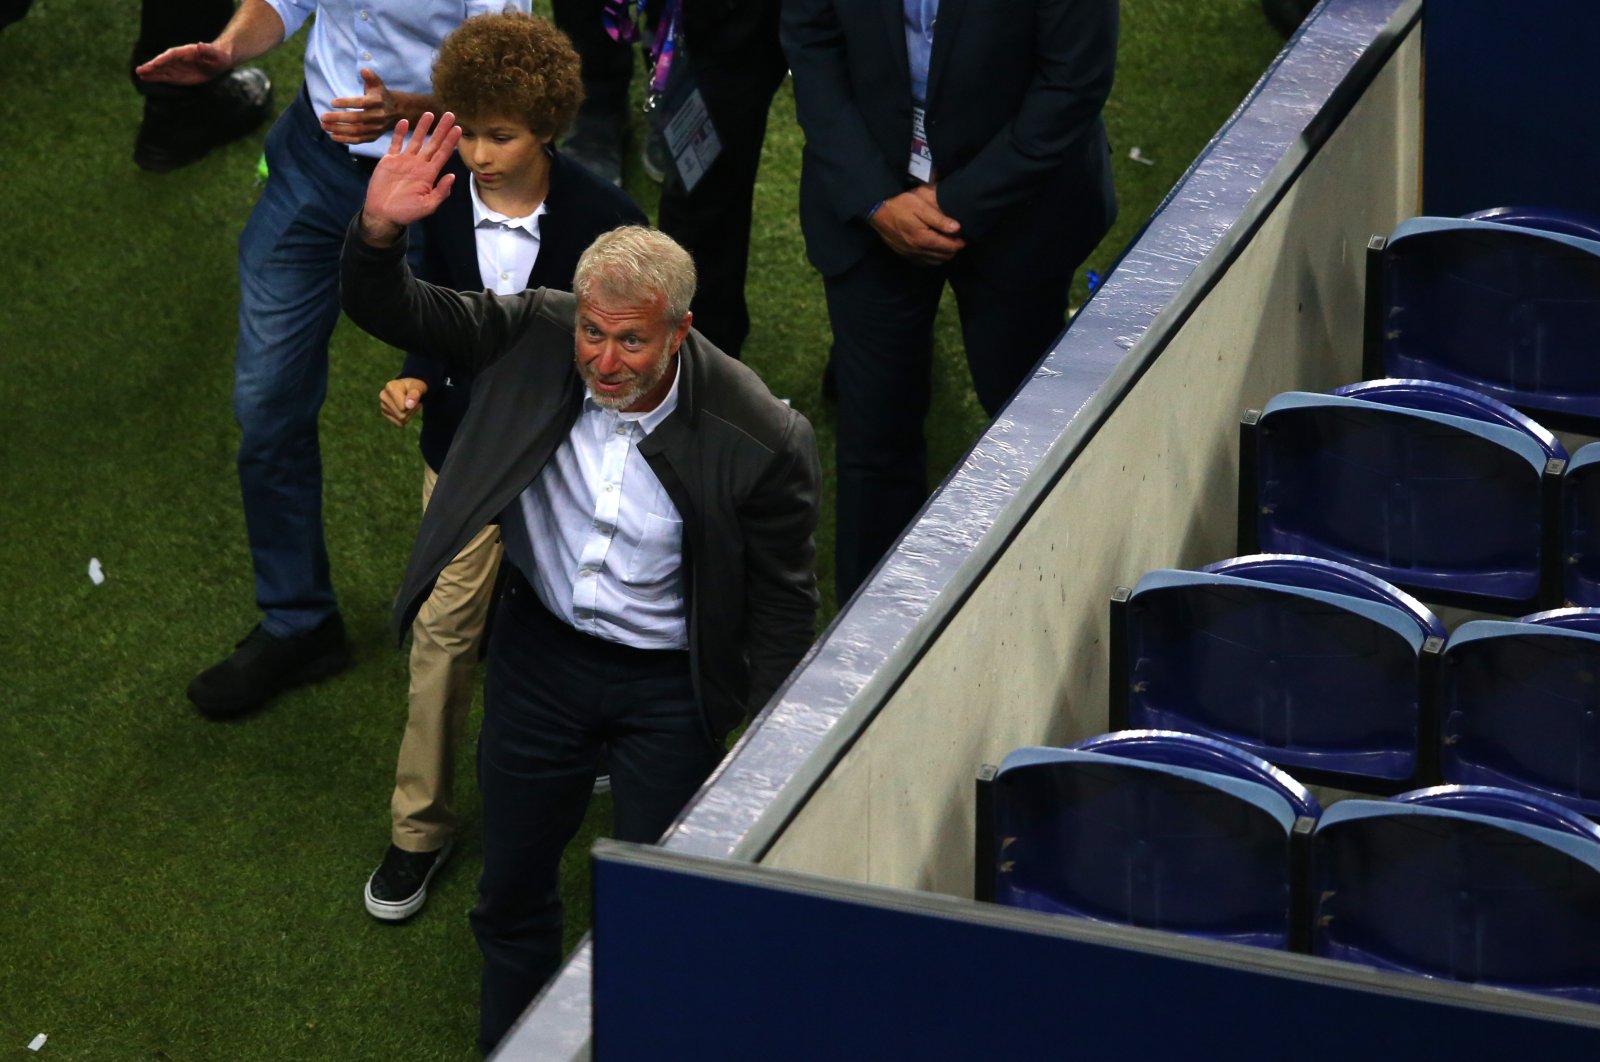 Roman Abramovich, owner of Chelsea, waves toward fans after the UEFA Champions League final between Manchester City and Chelsea FC at Estadio do Dragao, Porto, Portugal, May 29, 2021. (Getty Images Photo)